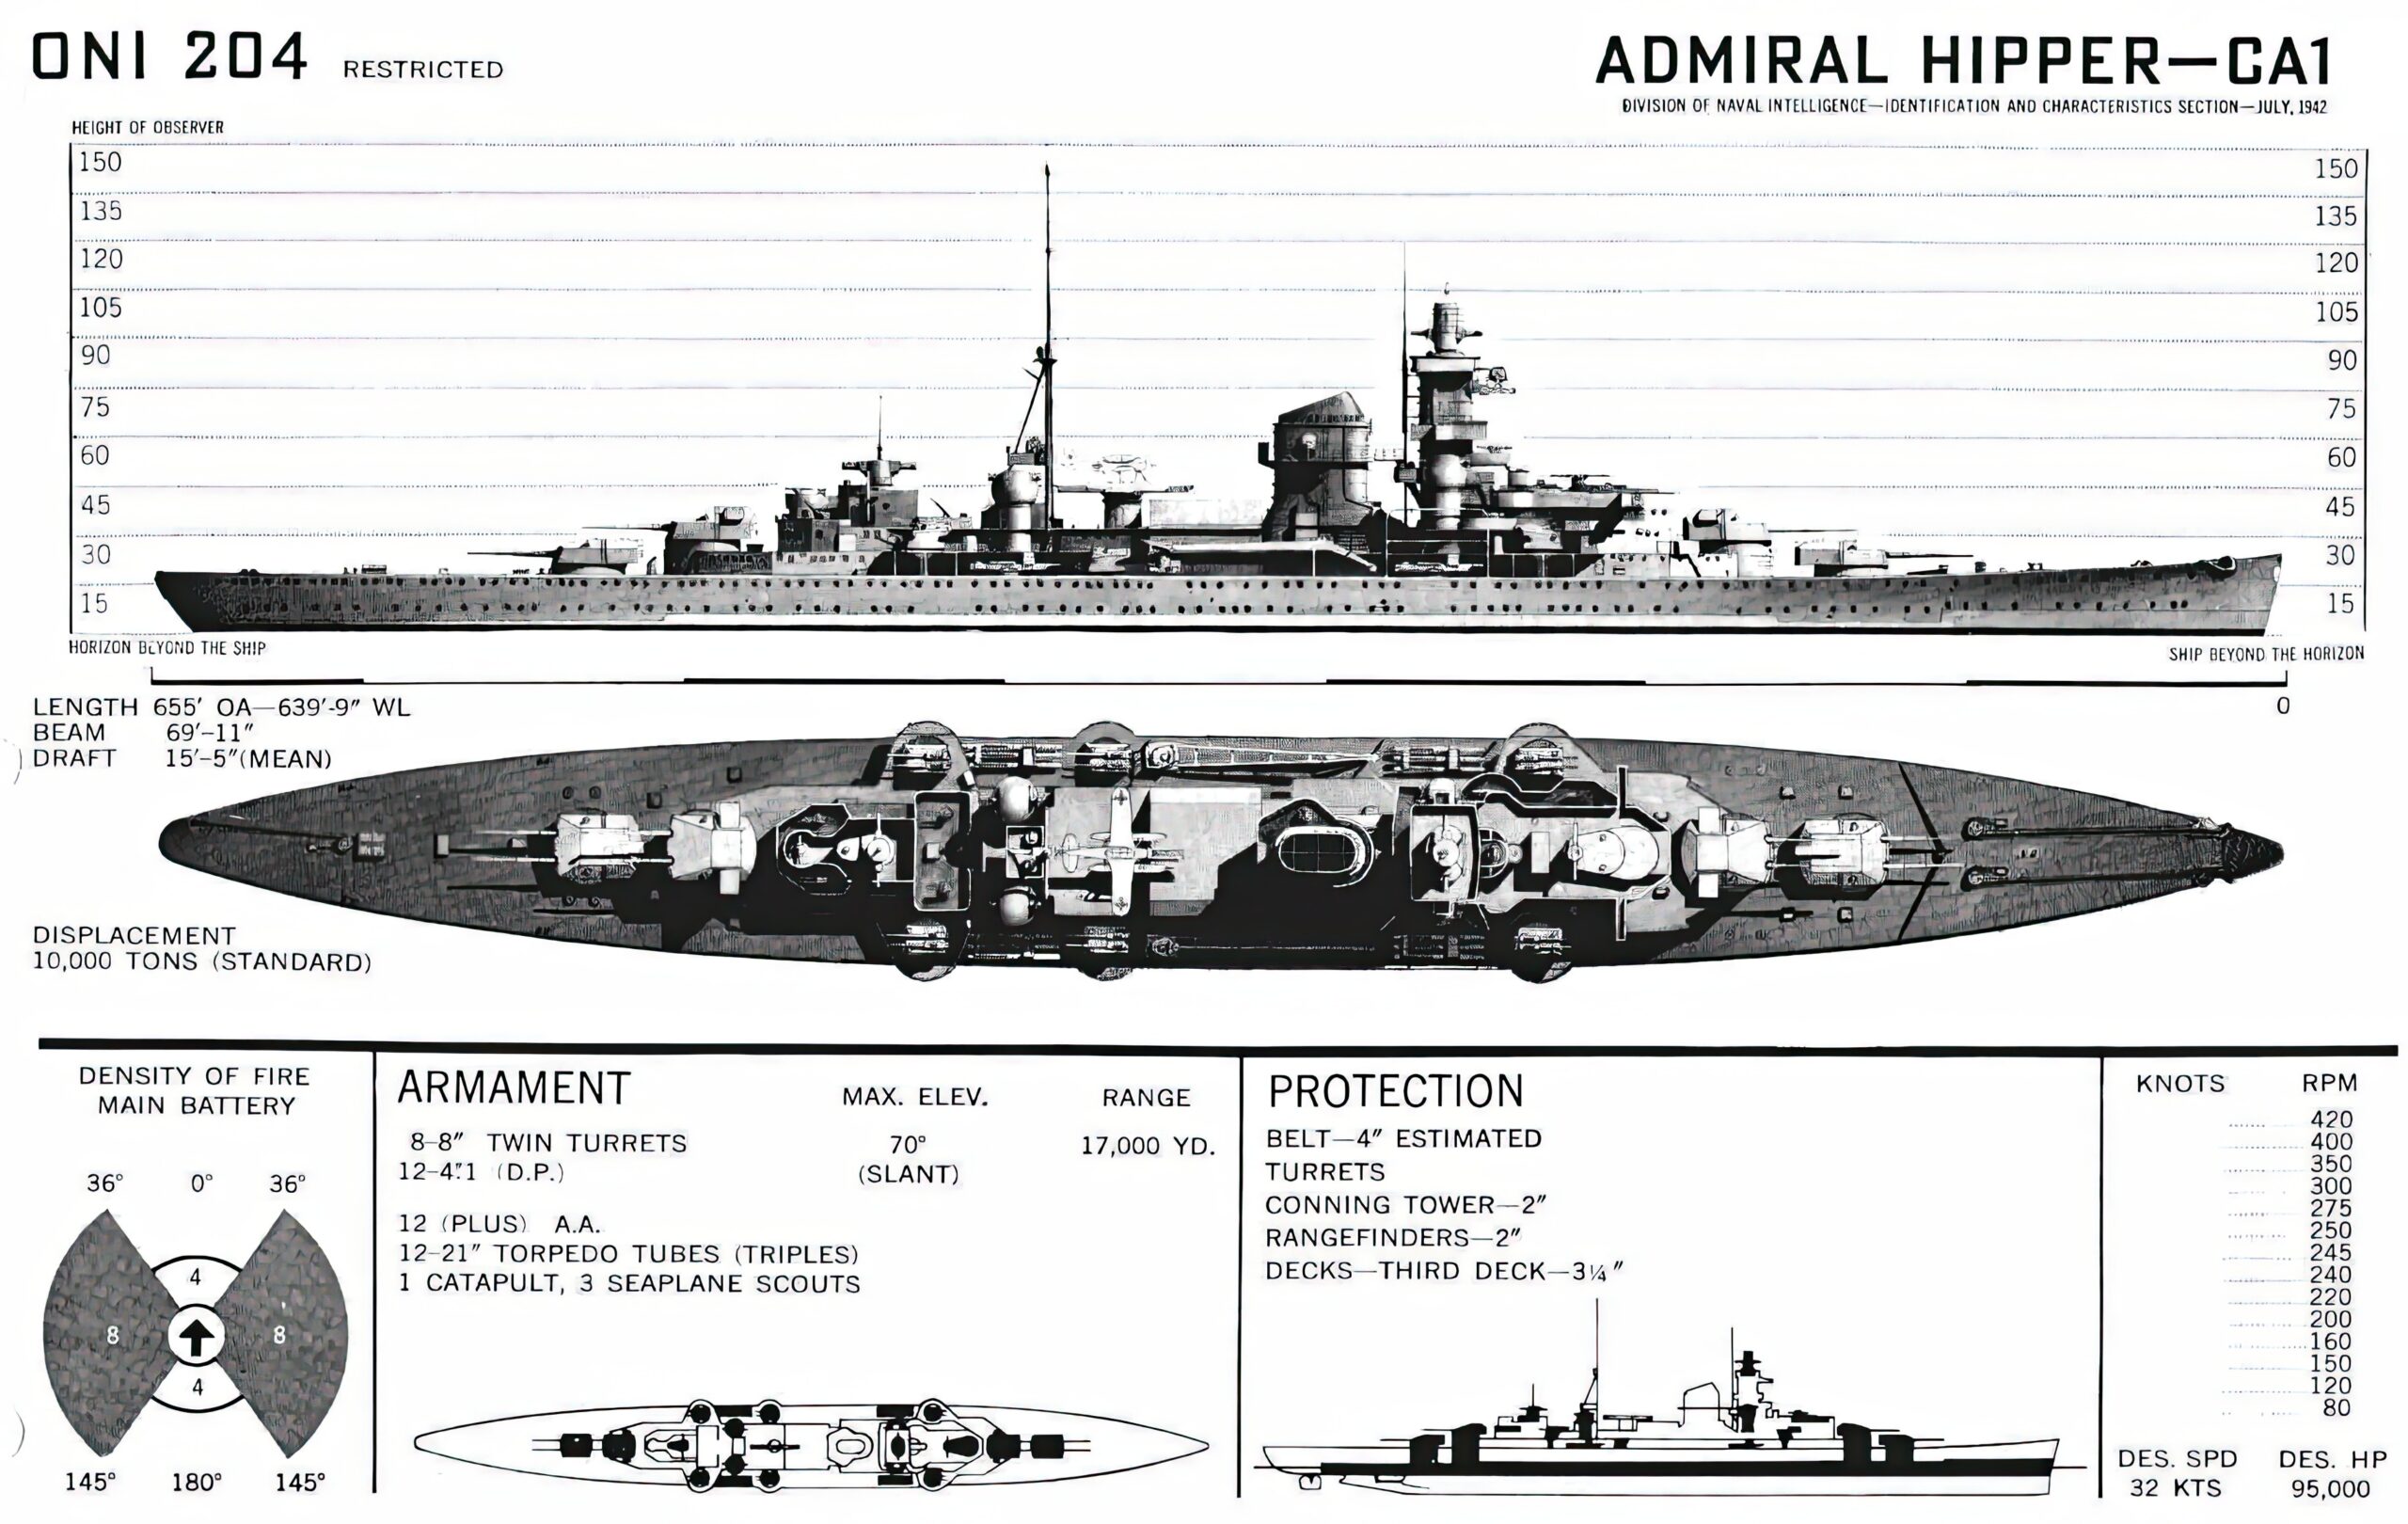 Wartime recognition drawing of an Admiral Hipper class cruiser, produced by the Office of Naval Intelligence in 1942